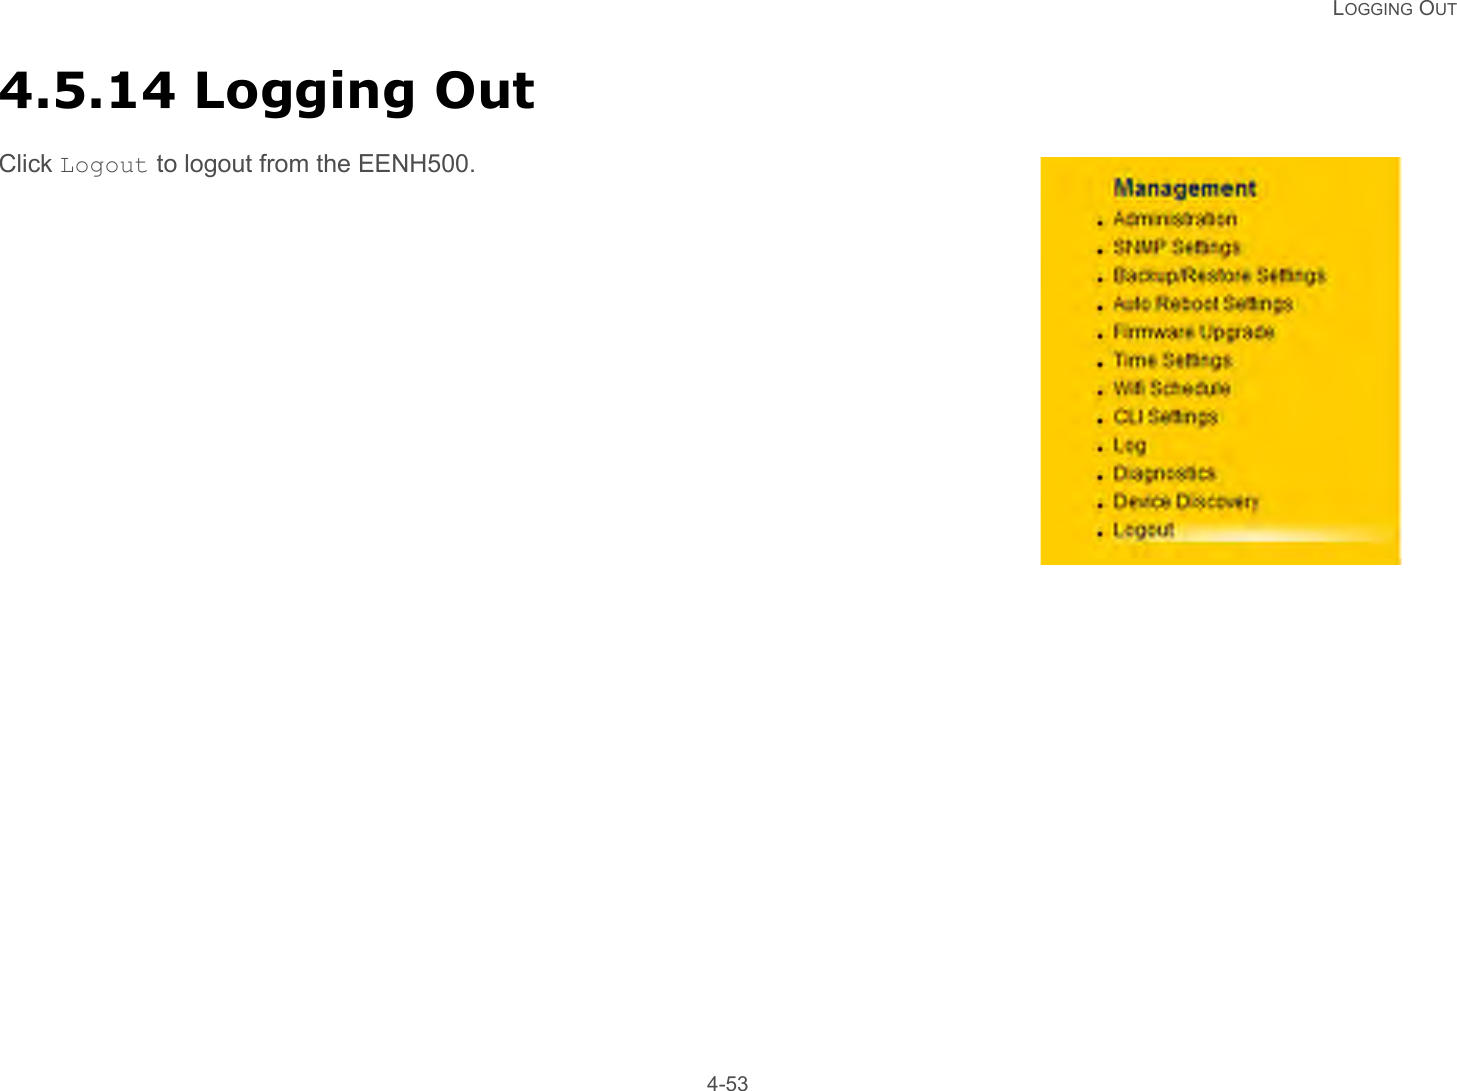   LOGGING OUT 4-534.5.14 Logging OutClick Logout to logout from the EENH500.